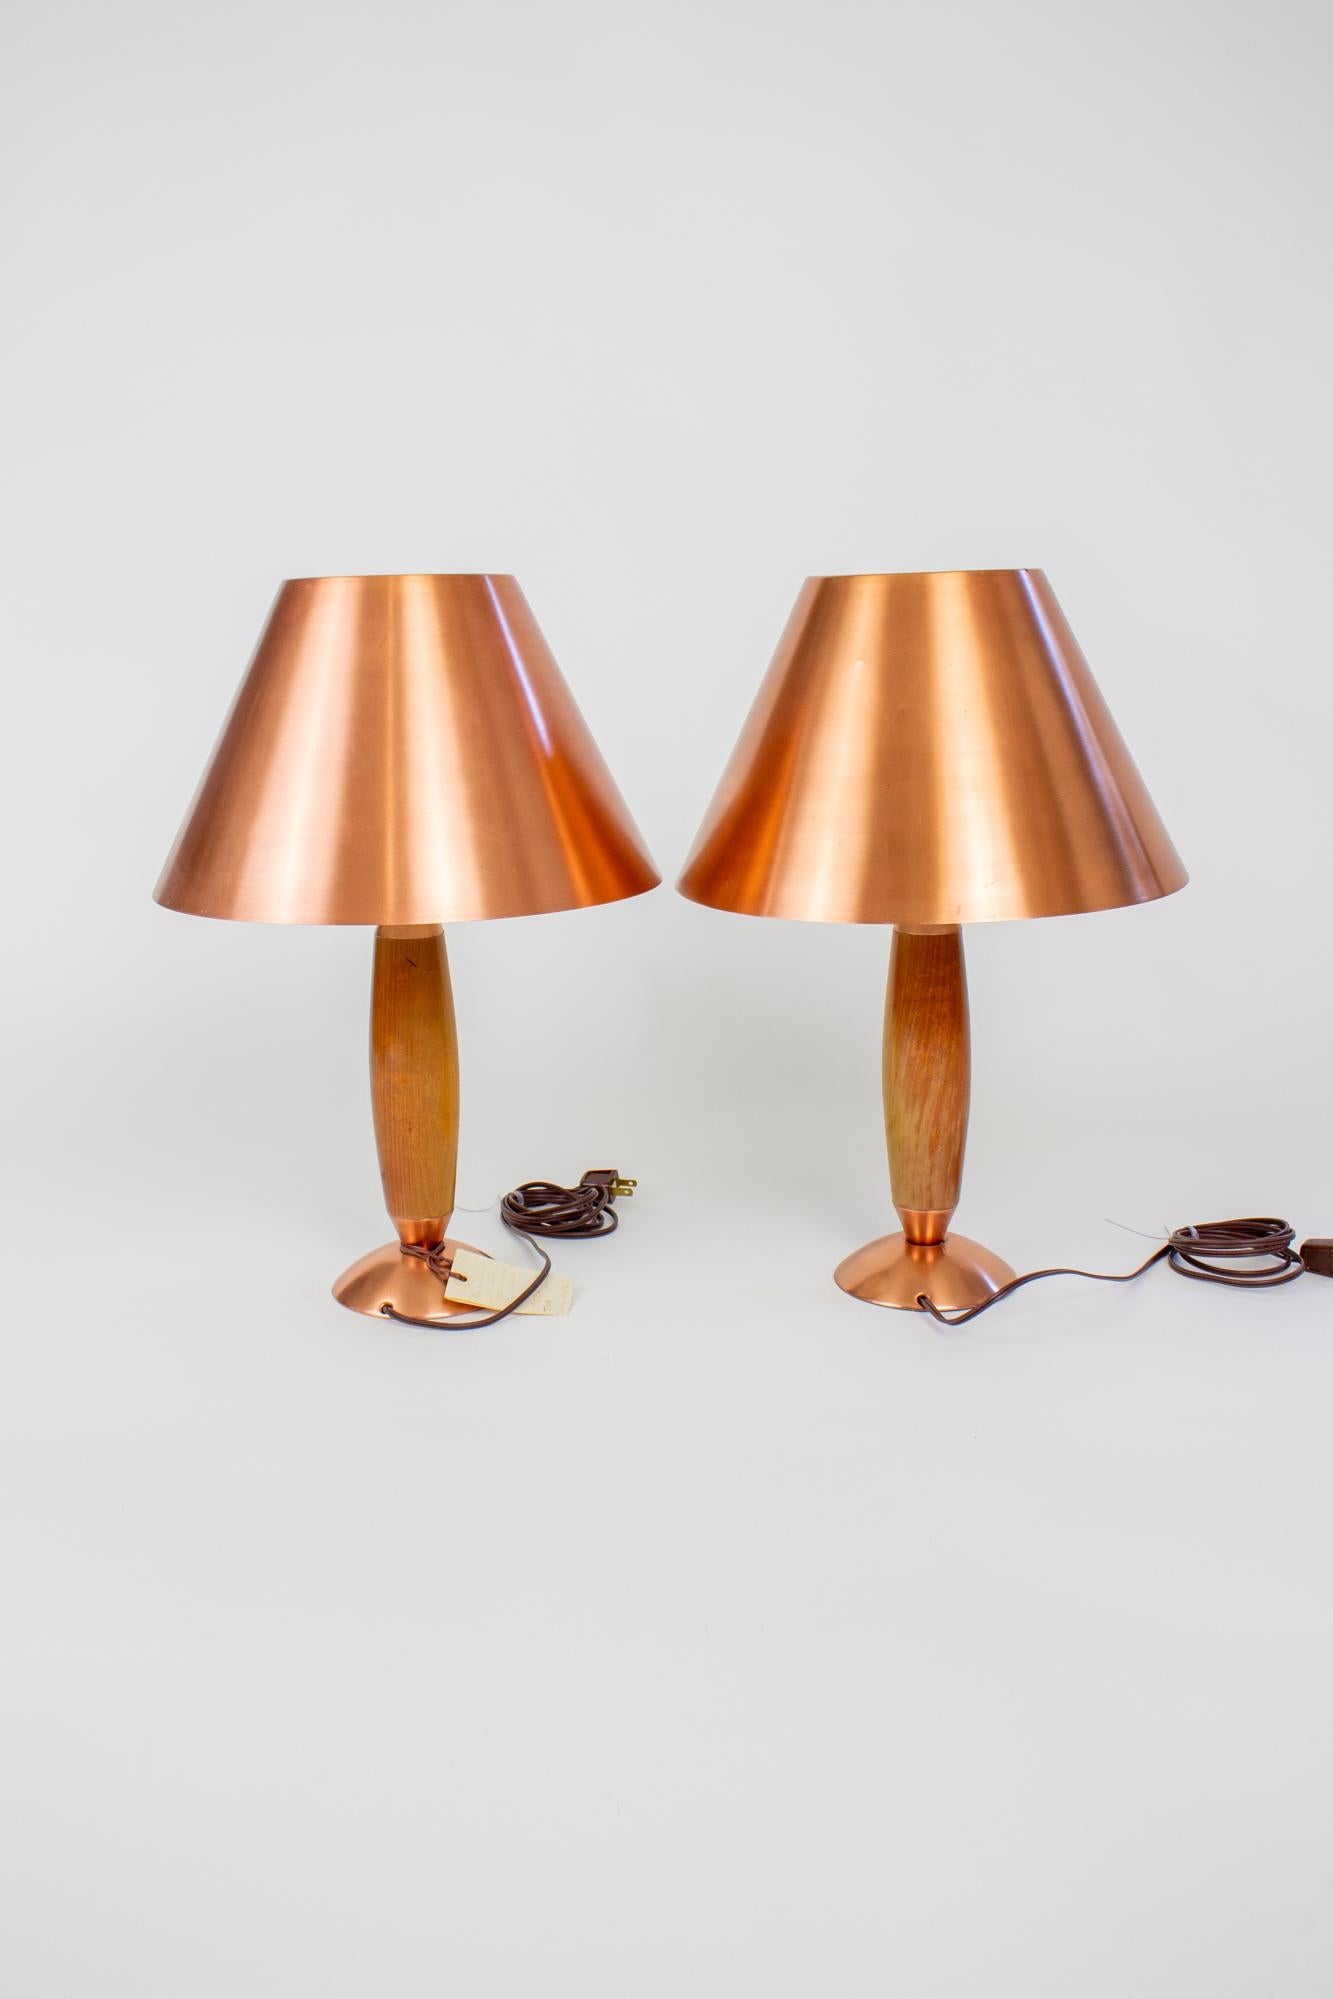 American Mid 20th Century Copper and Wood Masterline Table Lamps - a Pair For Sale